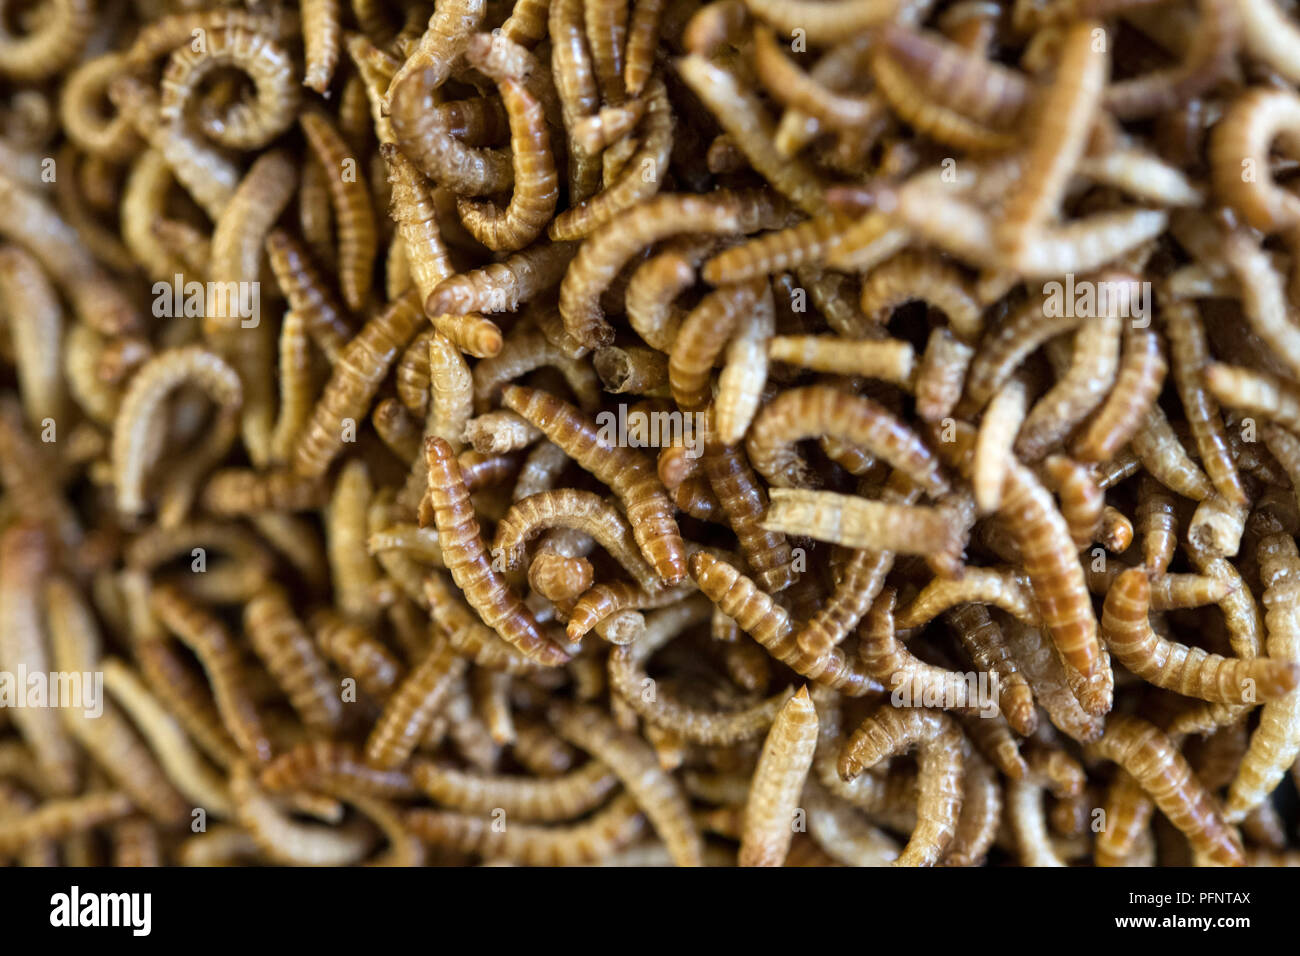 Pforzheim, Germany. 11th July, 2018. Dried larvae of a cereal fungus beetle  (Alphitobius diaperinus), also called Buffalo worm, lie on a table.  Plumento Food GmbH develops and distributes food products containing, among